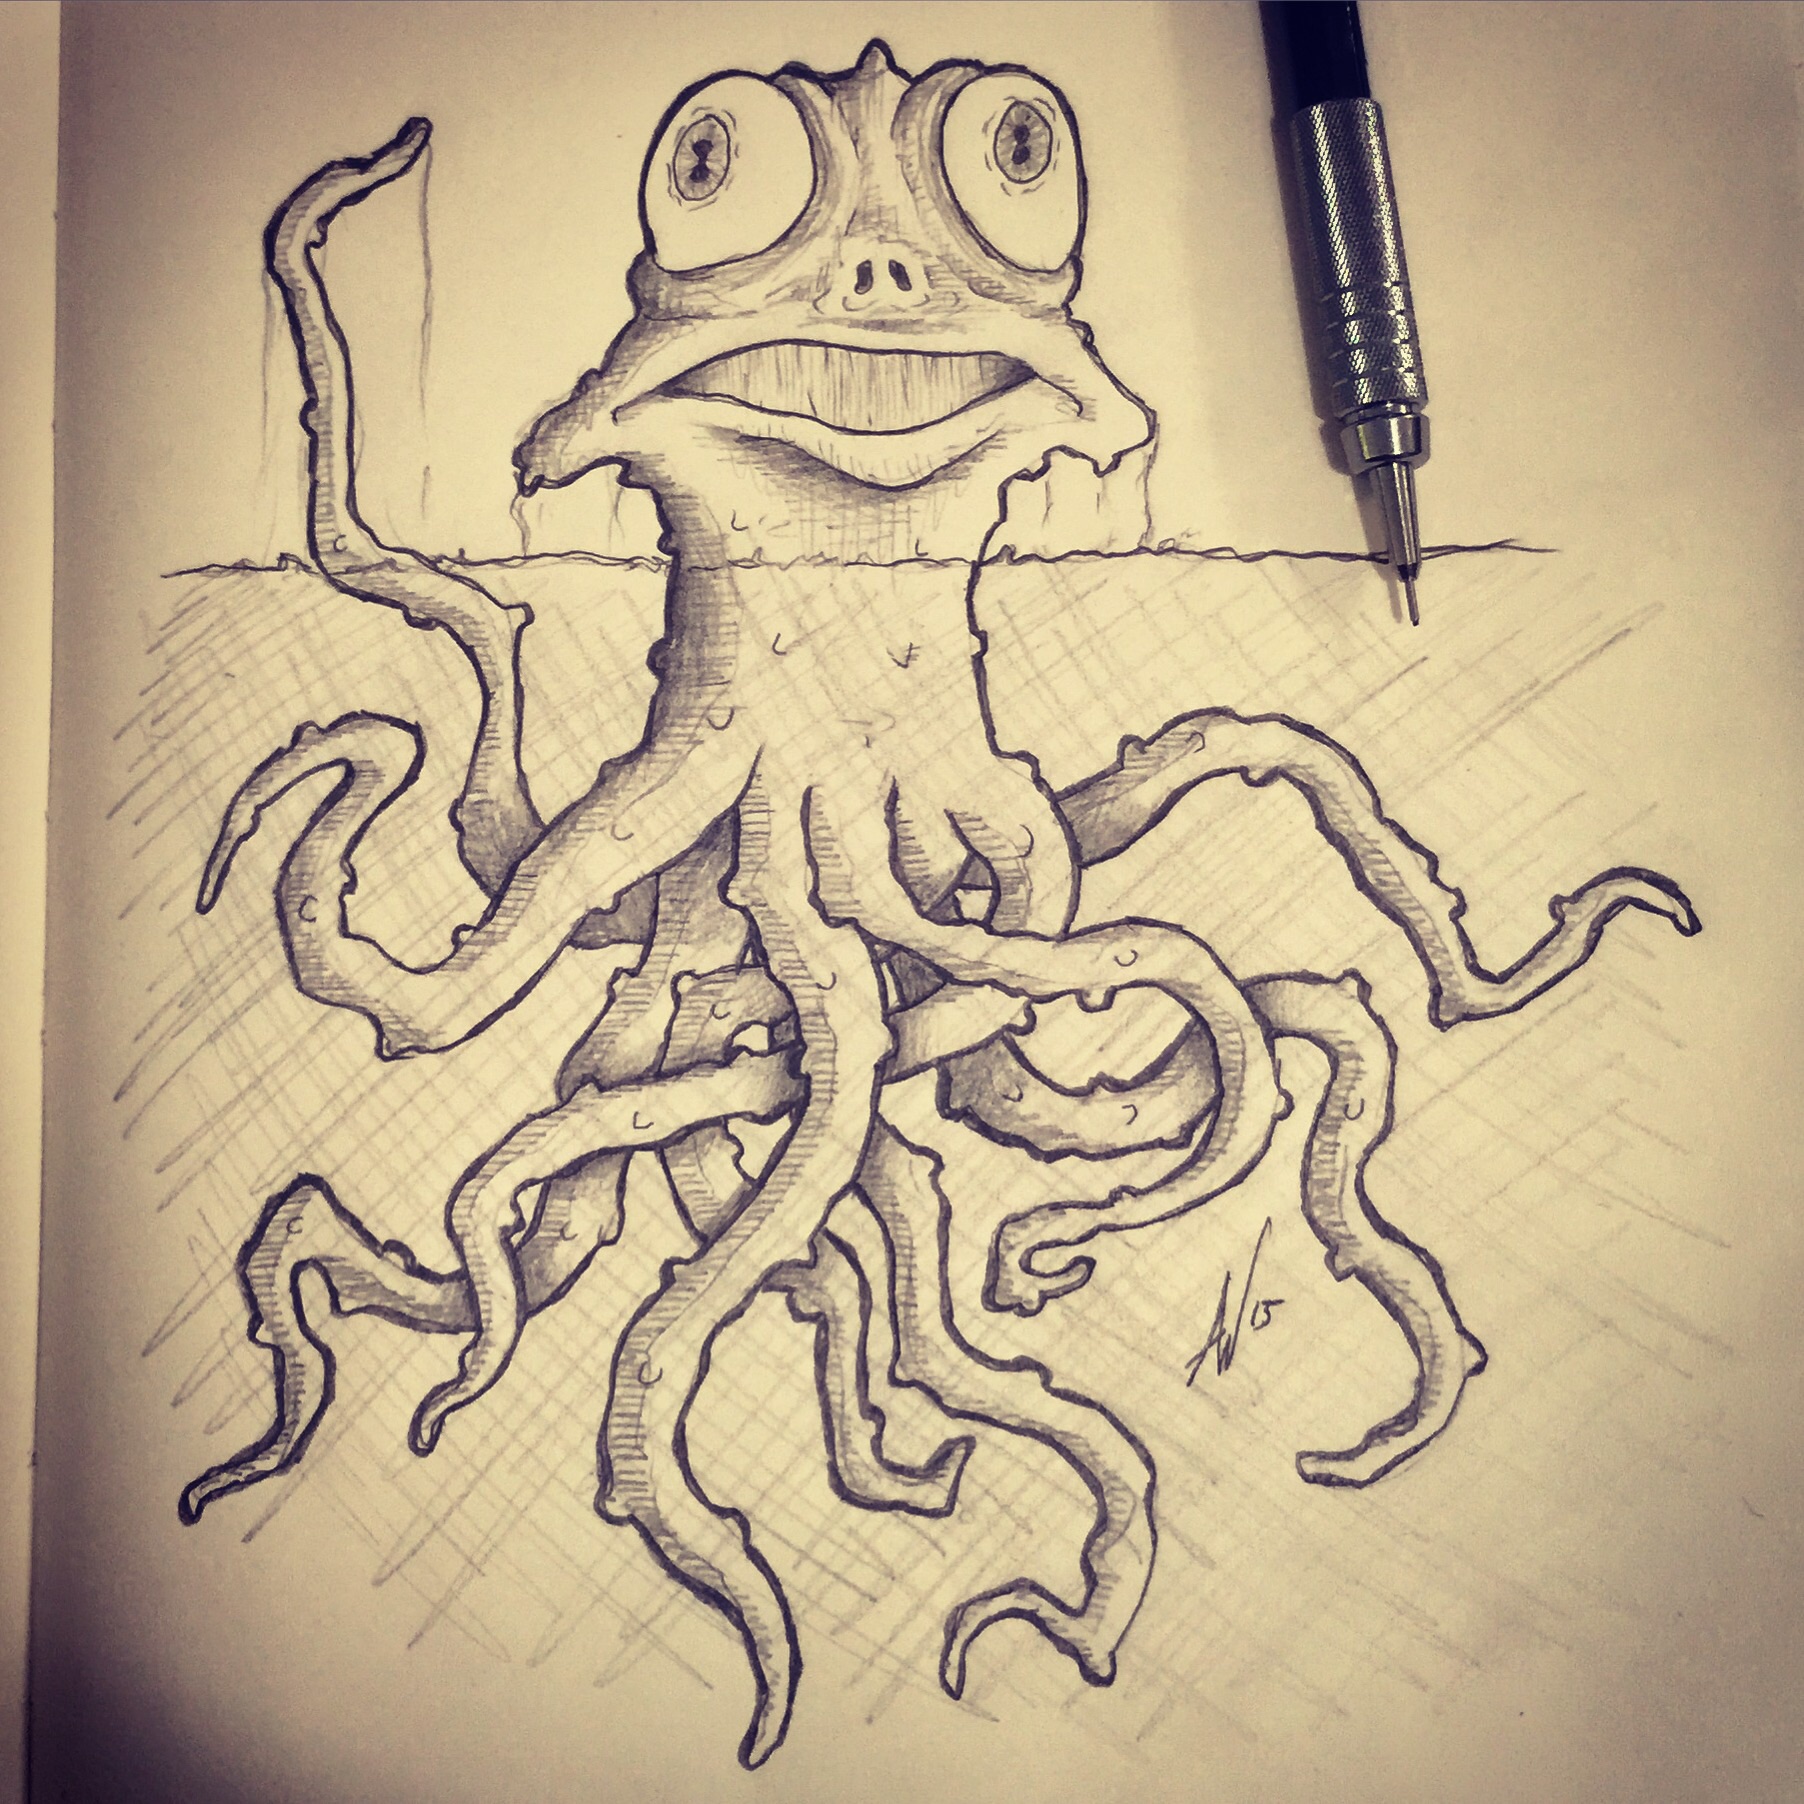 Daily Drawing: Tentacles From the Deep